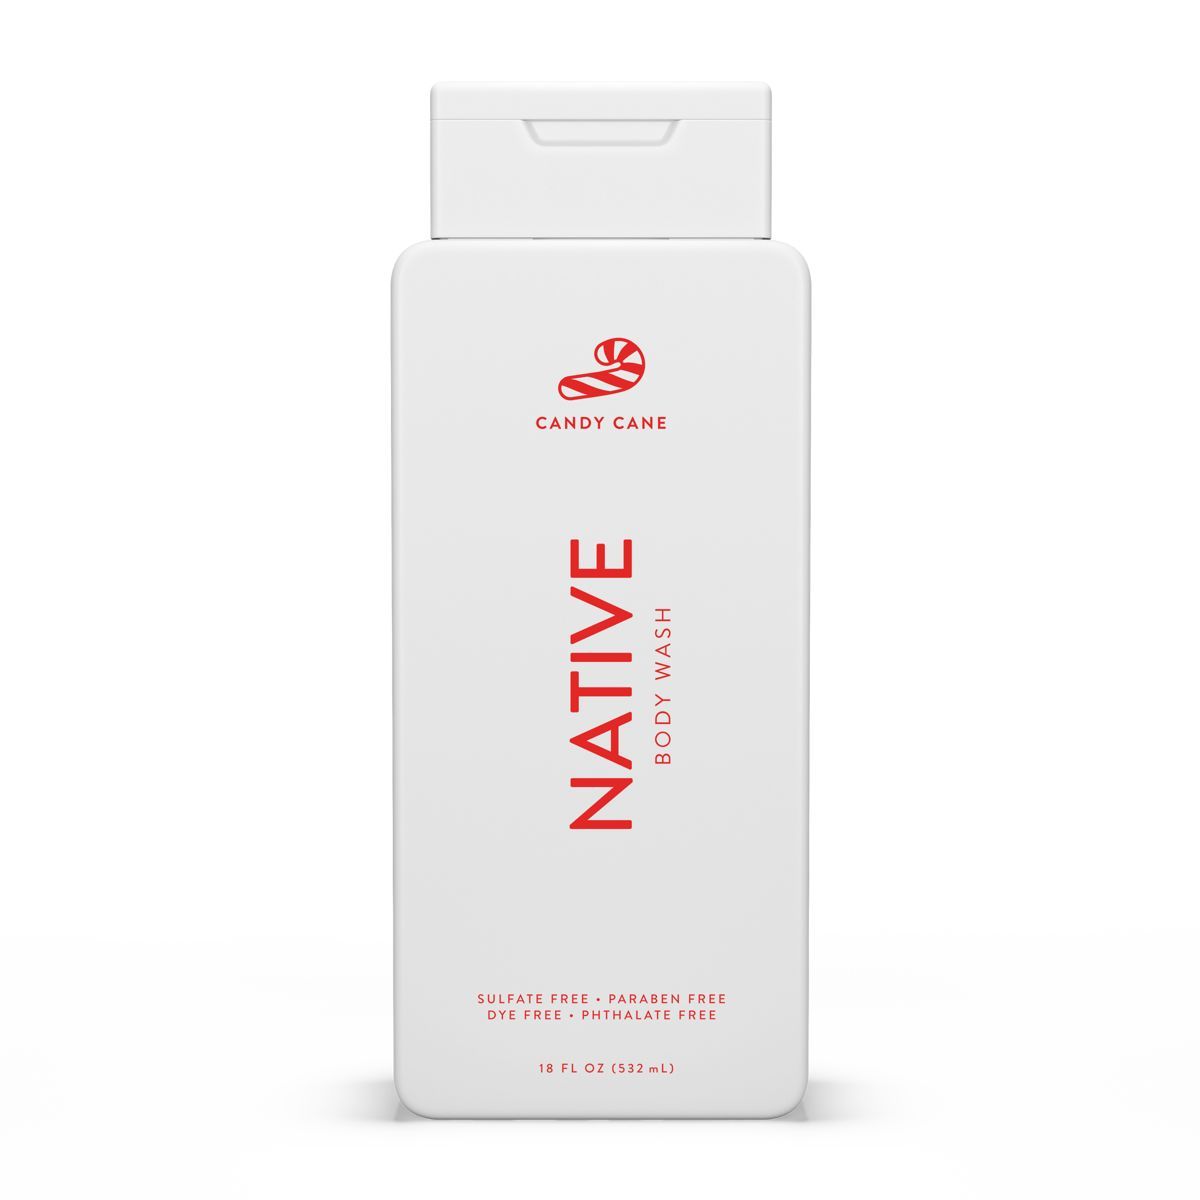 Native Body Wash - Limited Edition Holiday - Candy Cane - Sulfate Free - 18 fl oz | Target